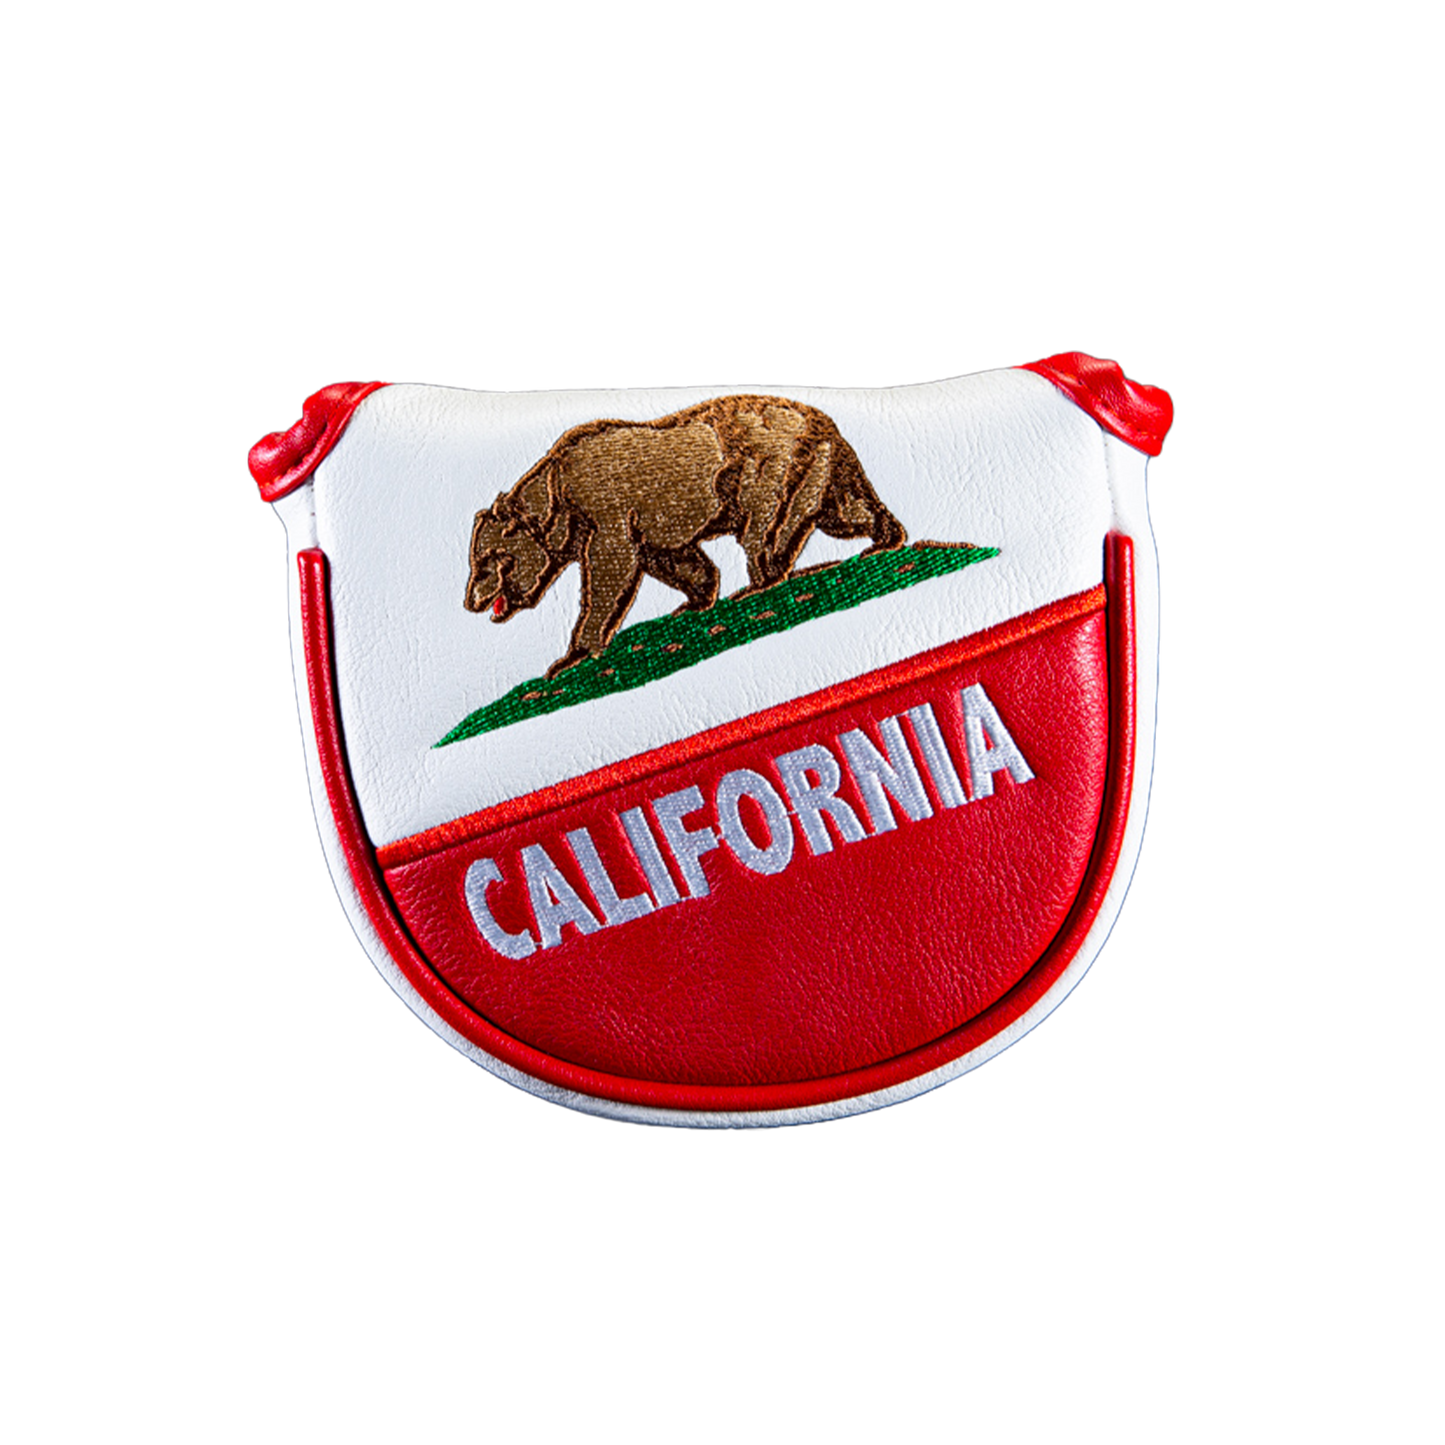 California Mallet Putter Cover